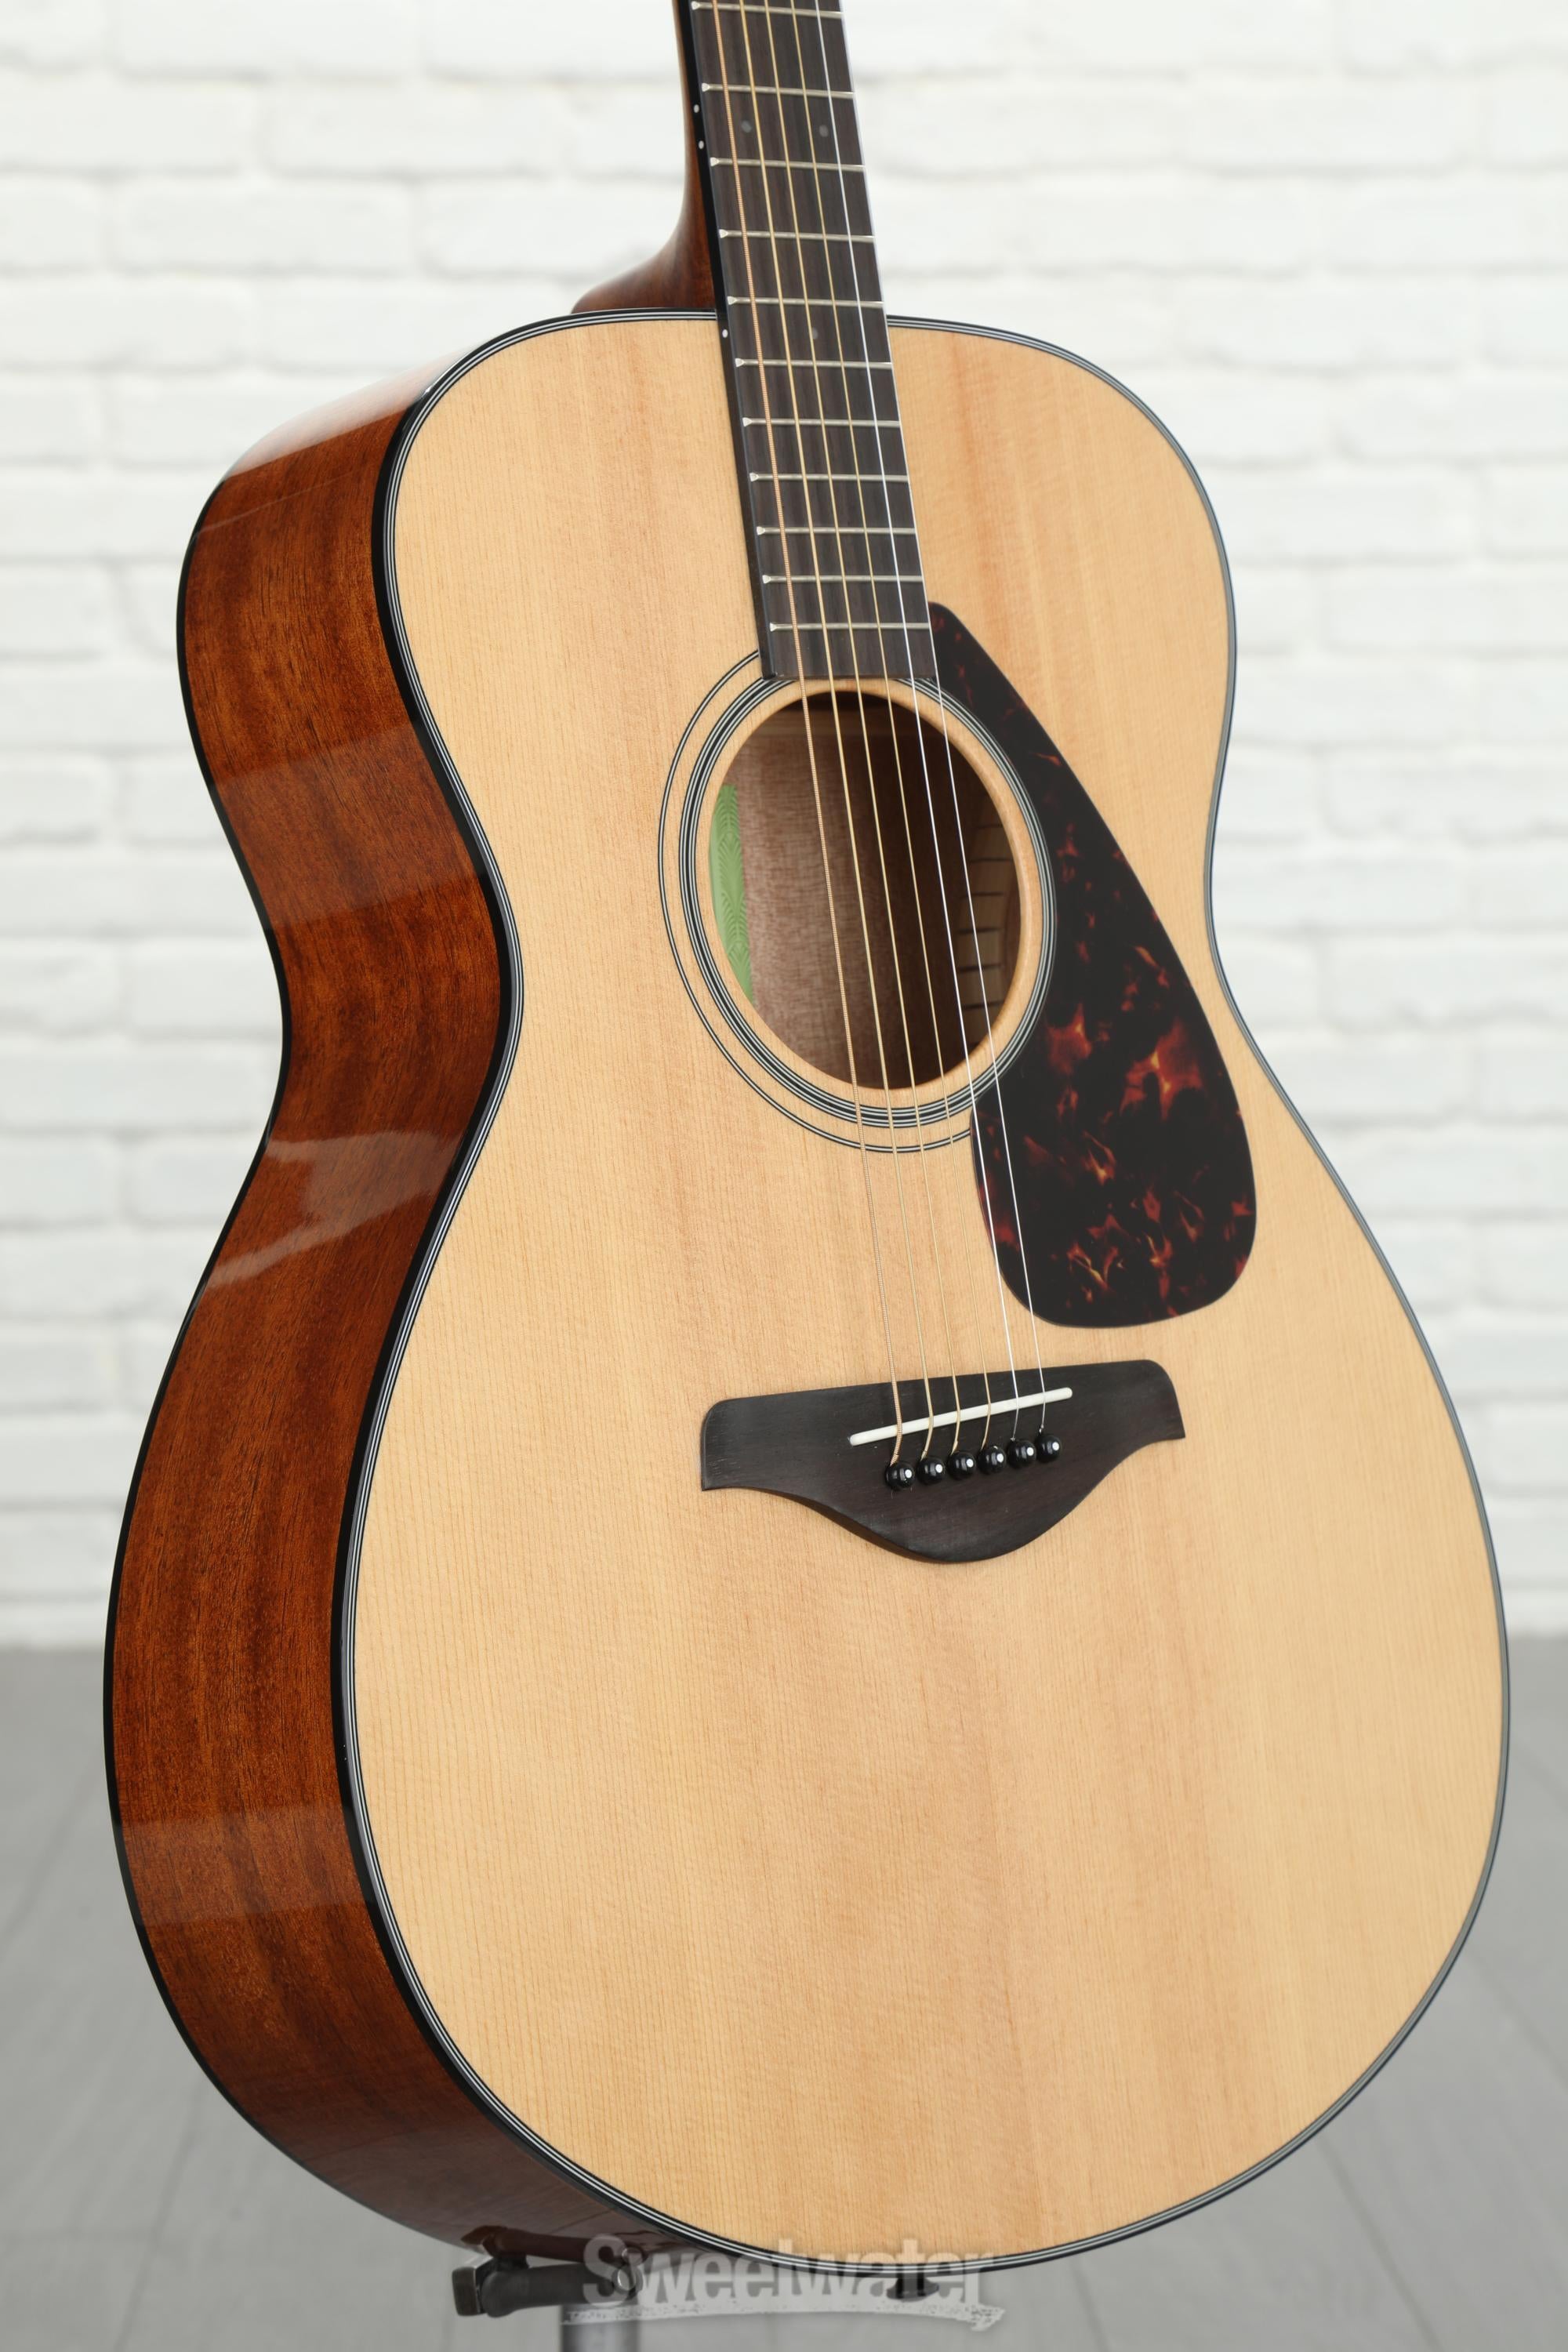 Yamaha FS800 Concert Acoustic Guitar - Natural | Sweetwater